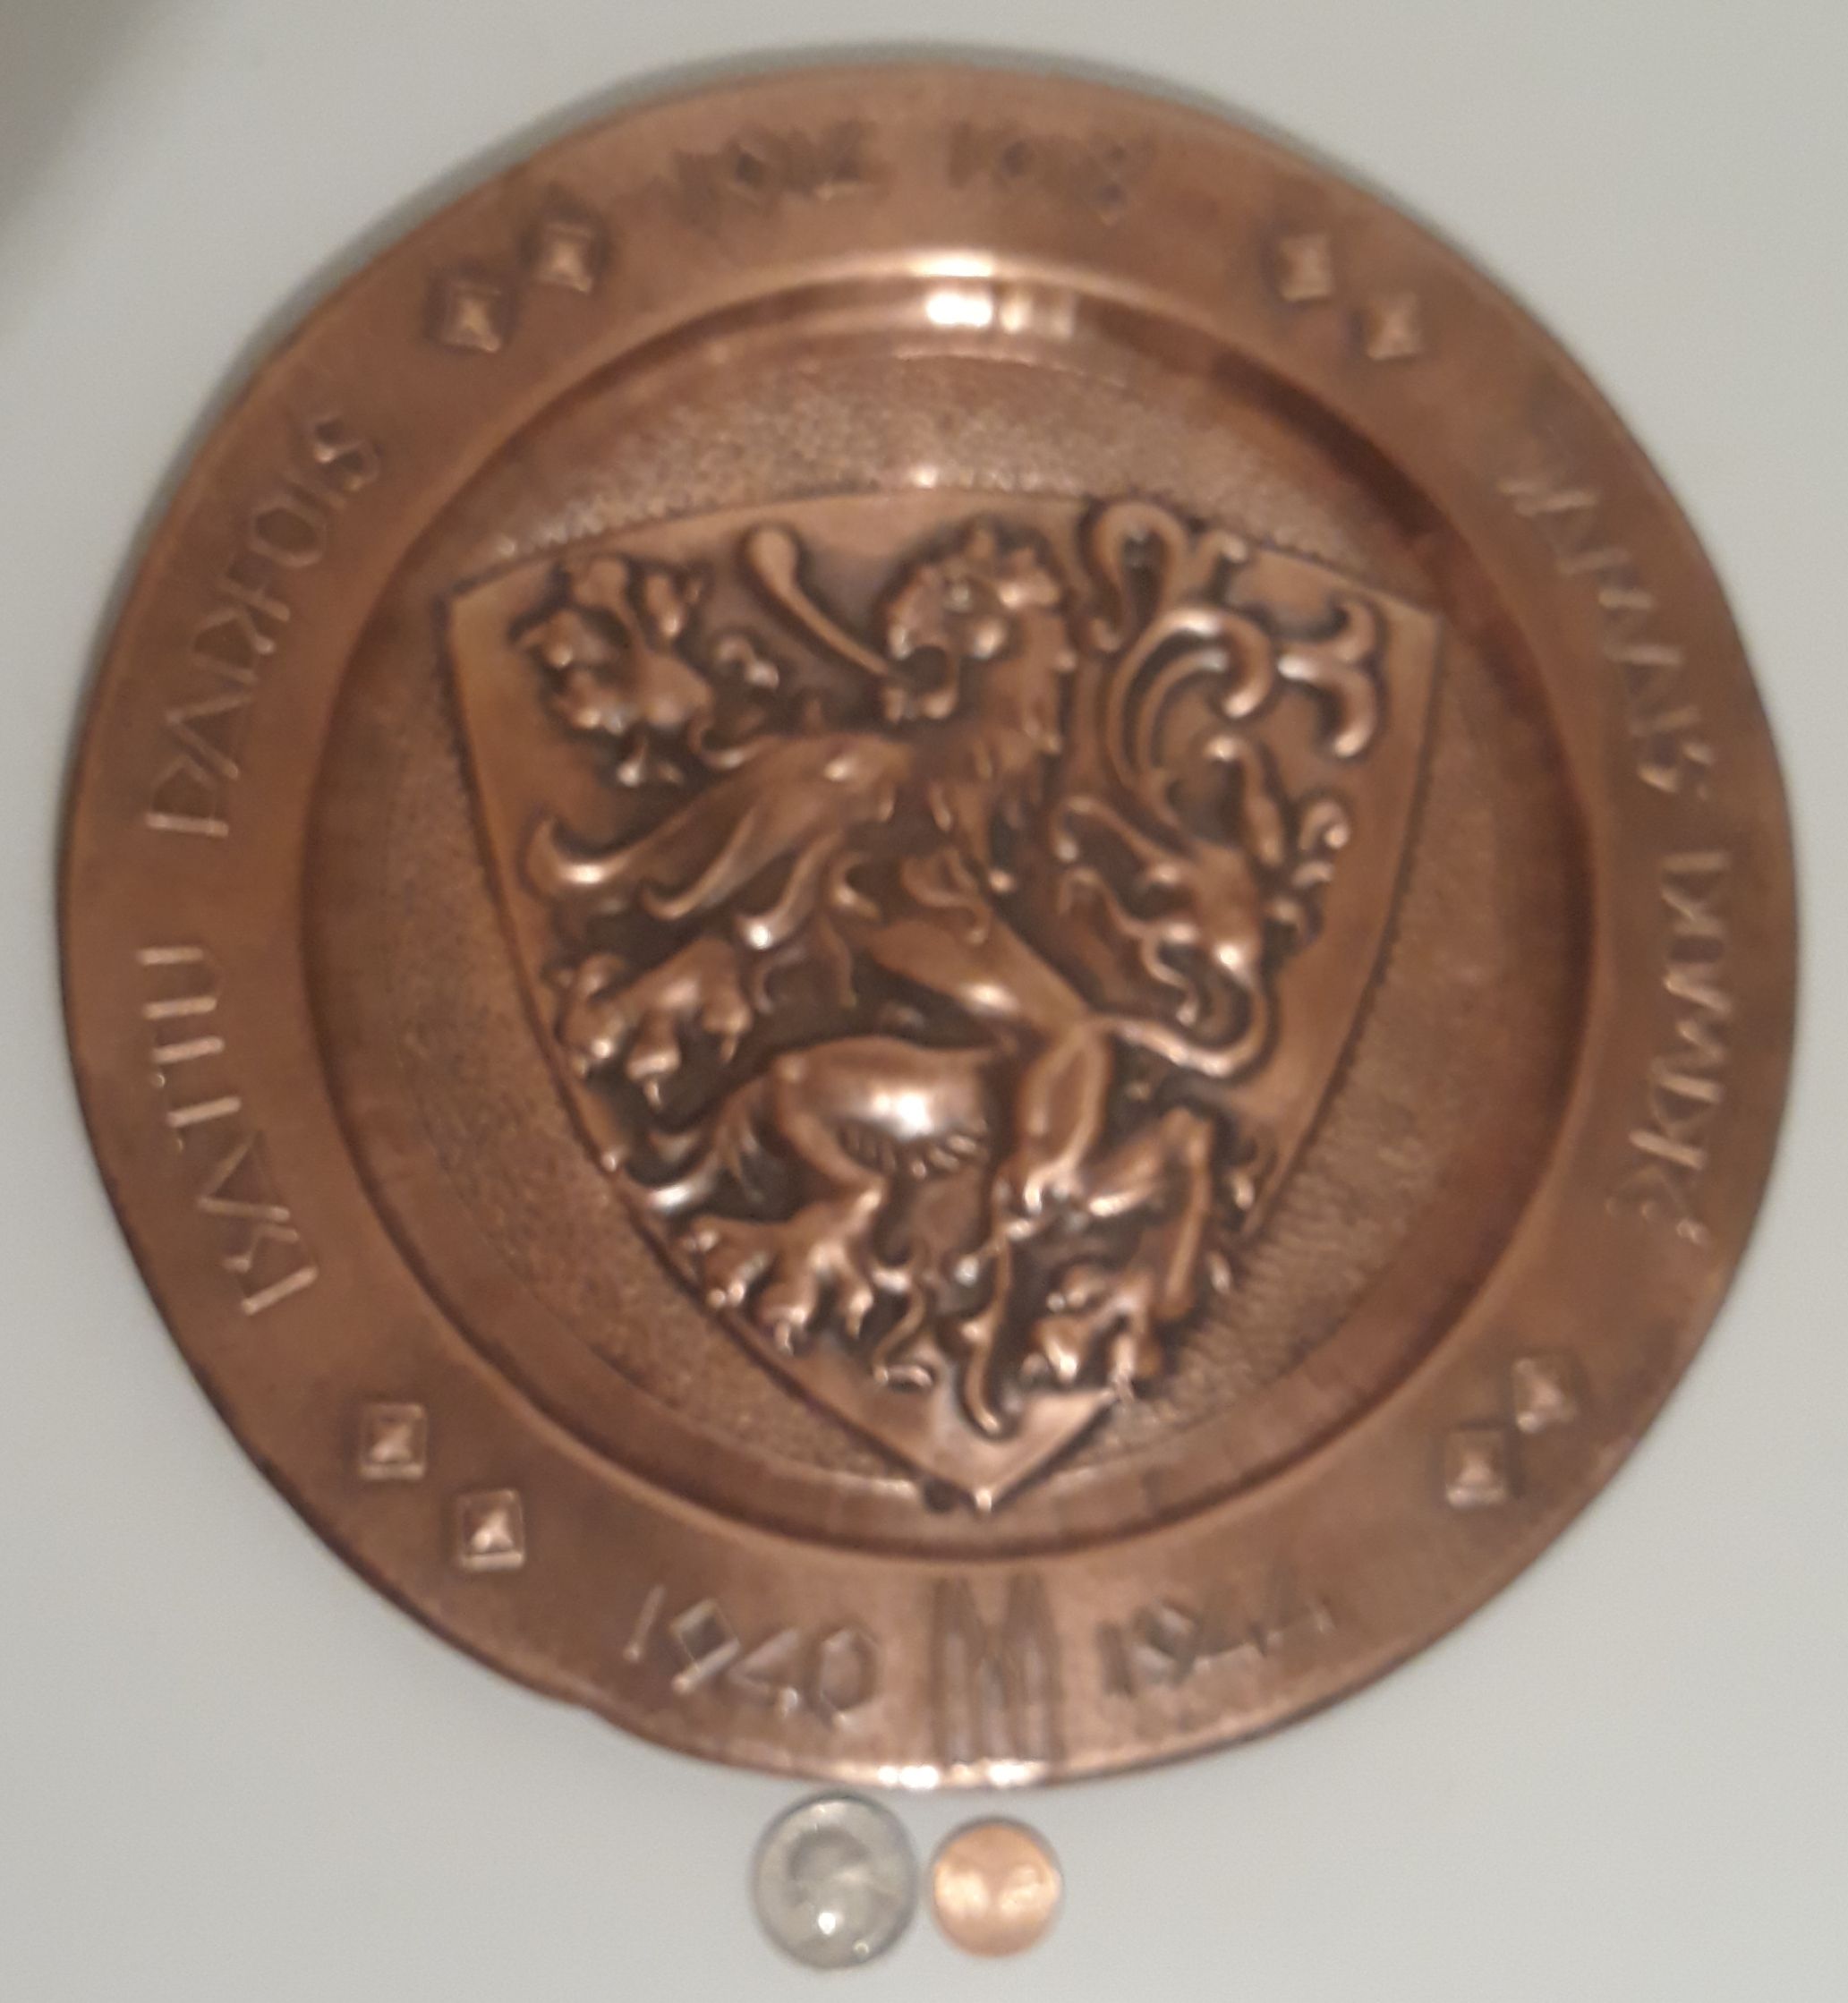 Vintage Metal Copper Wall Hanging Plate, 10" Wide, Lion, Home Decor, Wall Decor, Shelf Display, This Can Be Shined Up Even More